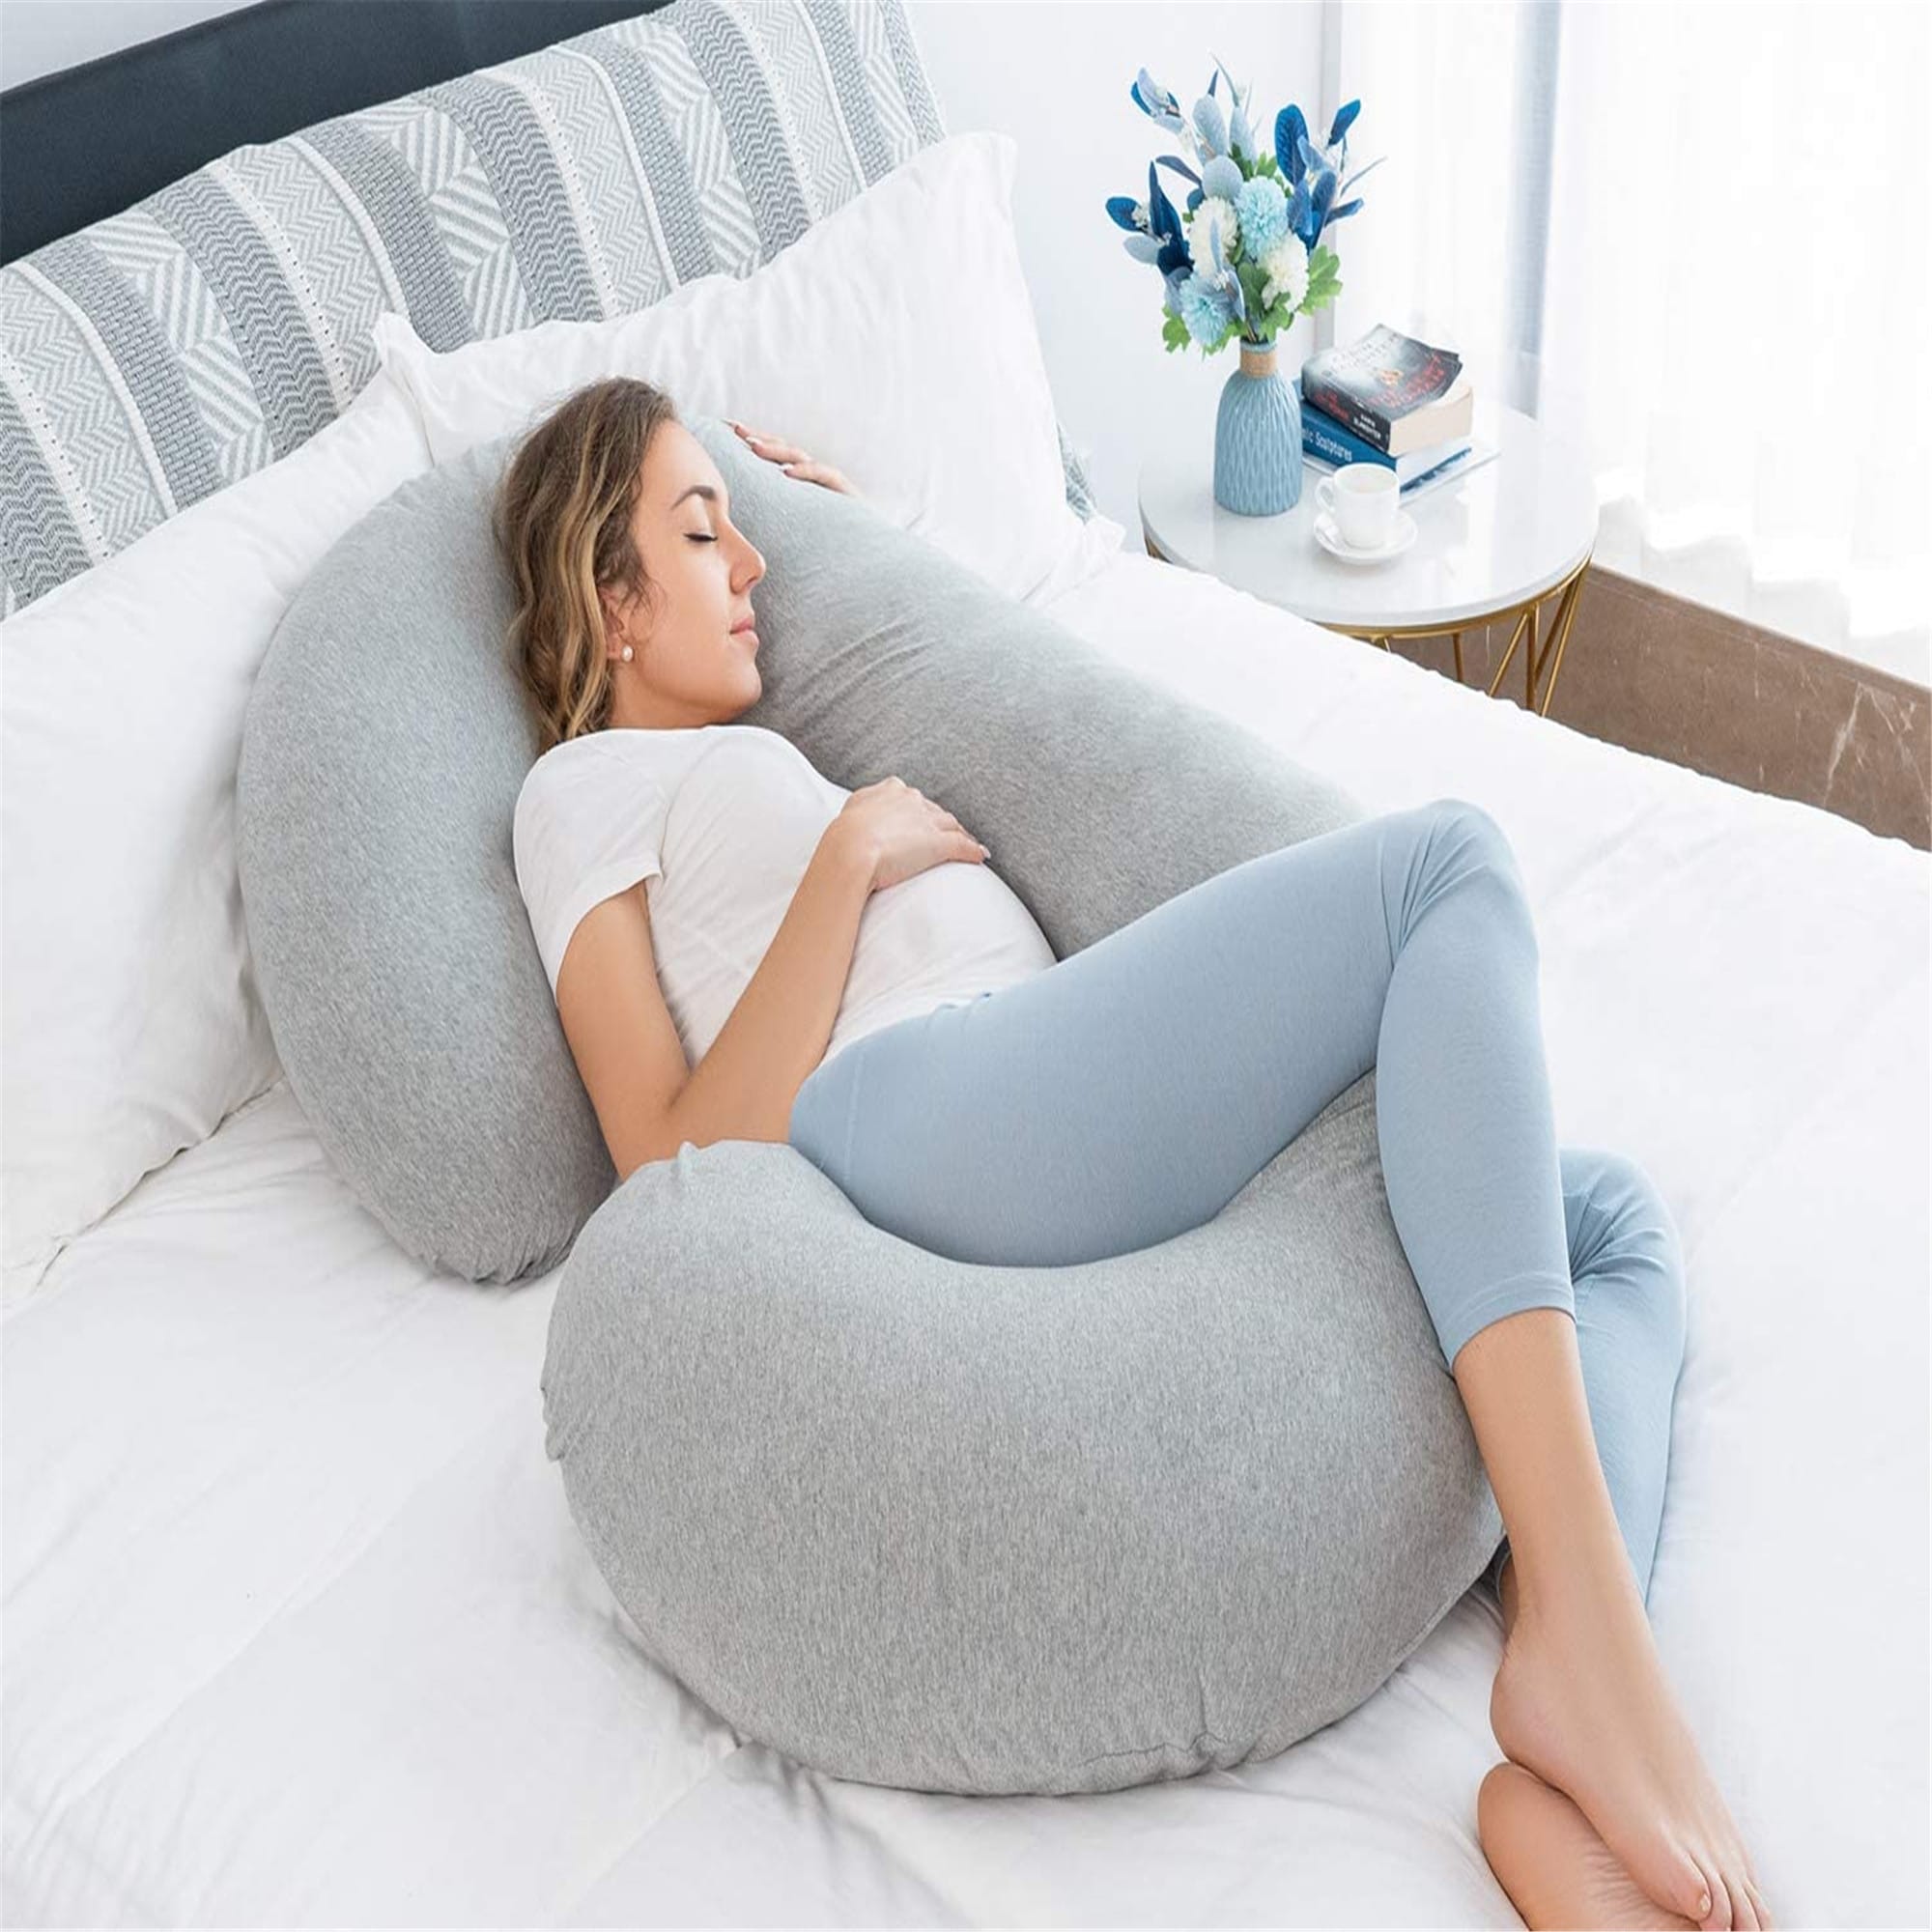 https://ak1.ostkcdn.com/images/products/is/images/direct/cd822b08b64030febcae582fe12a8ba66e9a7373/Pregnancy-Pillow%2CMaternity-Body-Pillow-for-Pregnant-Women%2CC-Shaped-Full-Body-Pillow-with-Zippers-Jersey-Cover.jpg